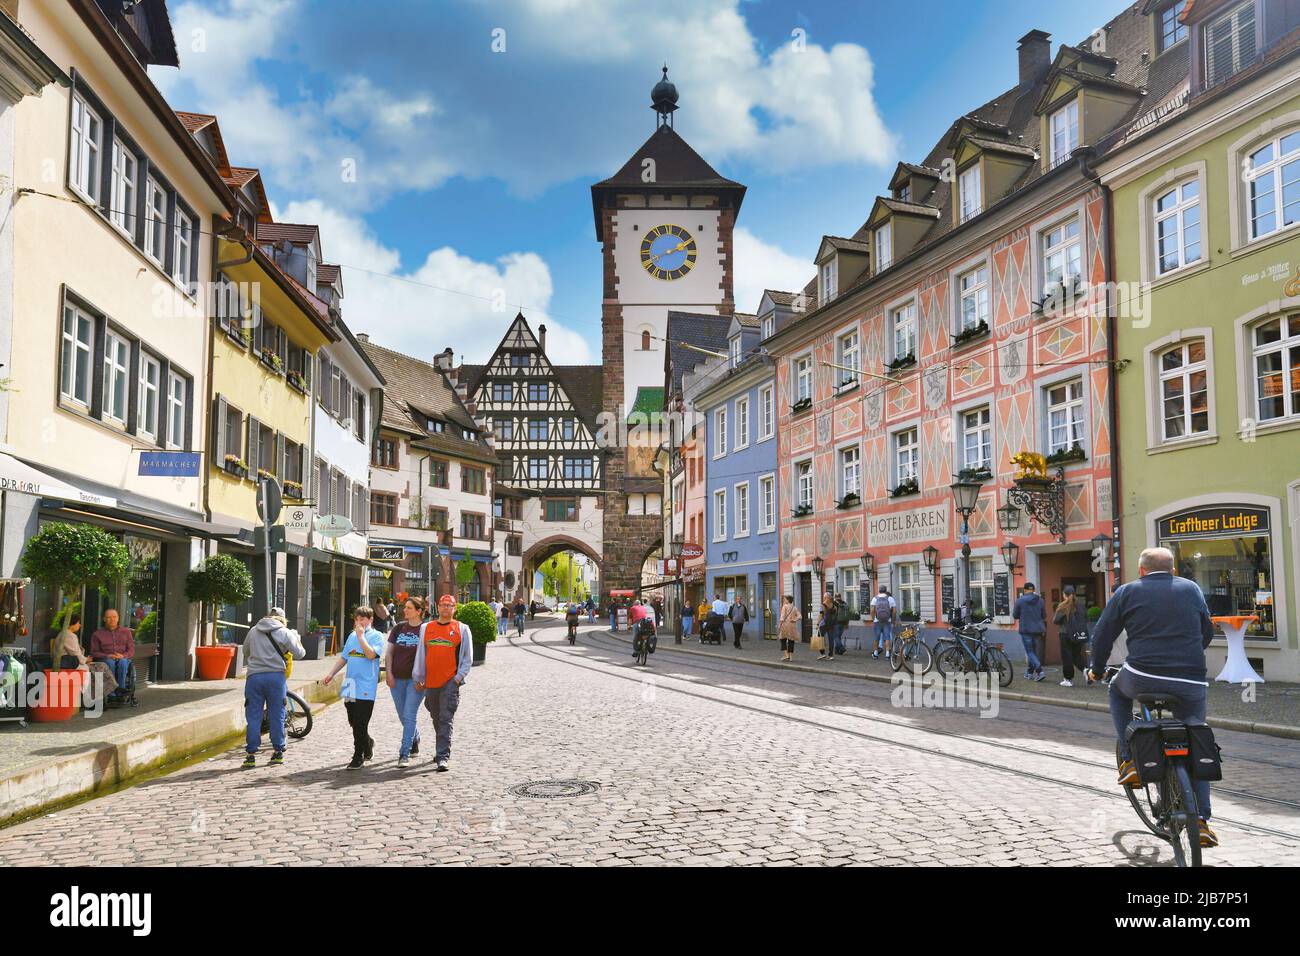 Freiburg, Germany - April 2022: Tower of old city gate called 'Schwabentor' in historic city center Stock Photo